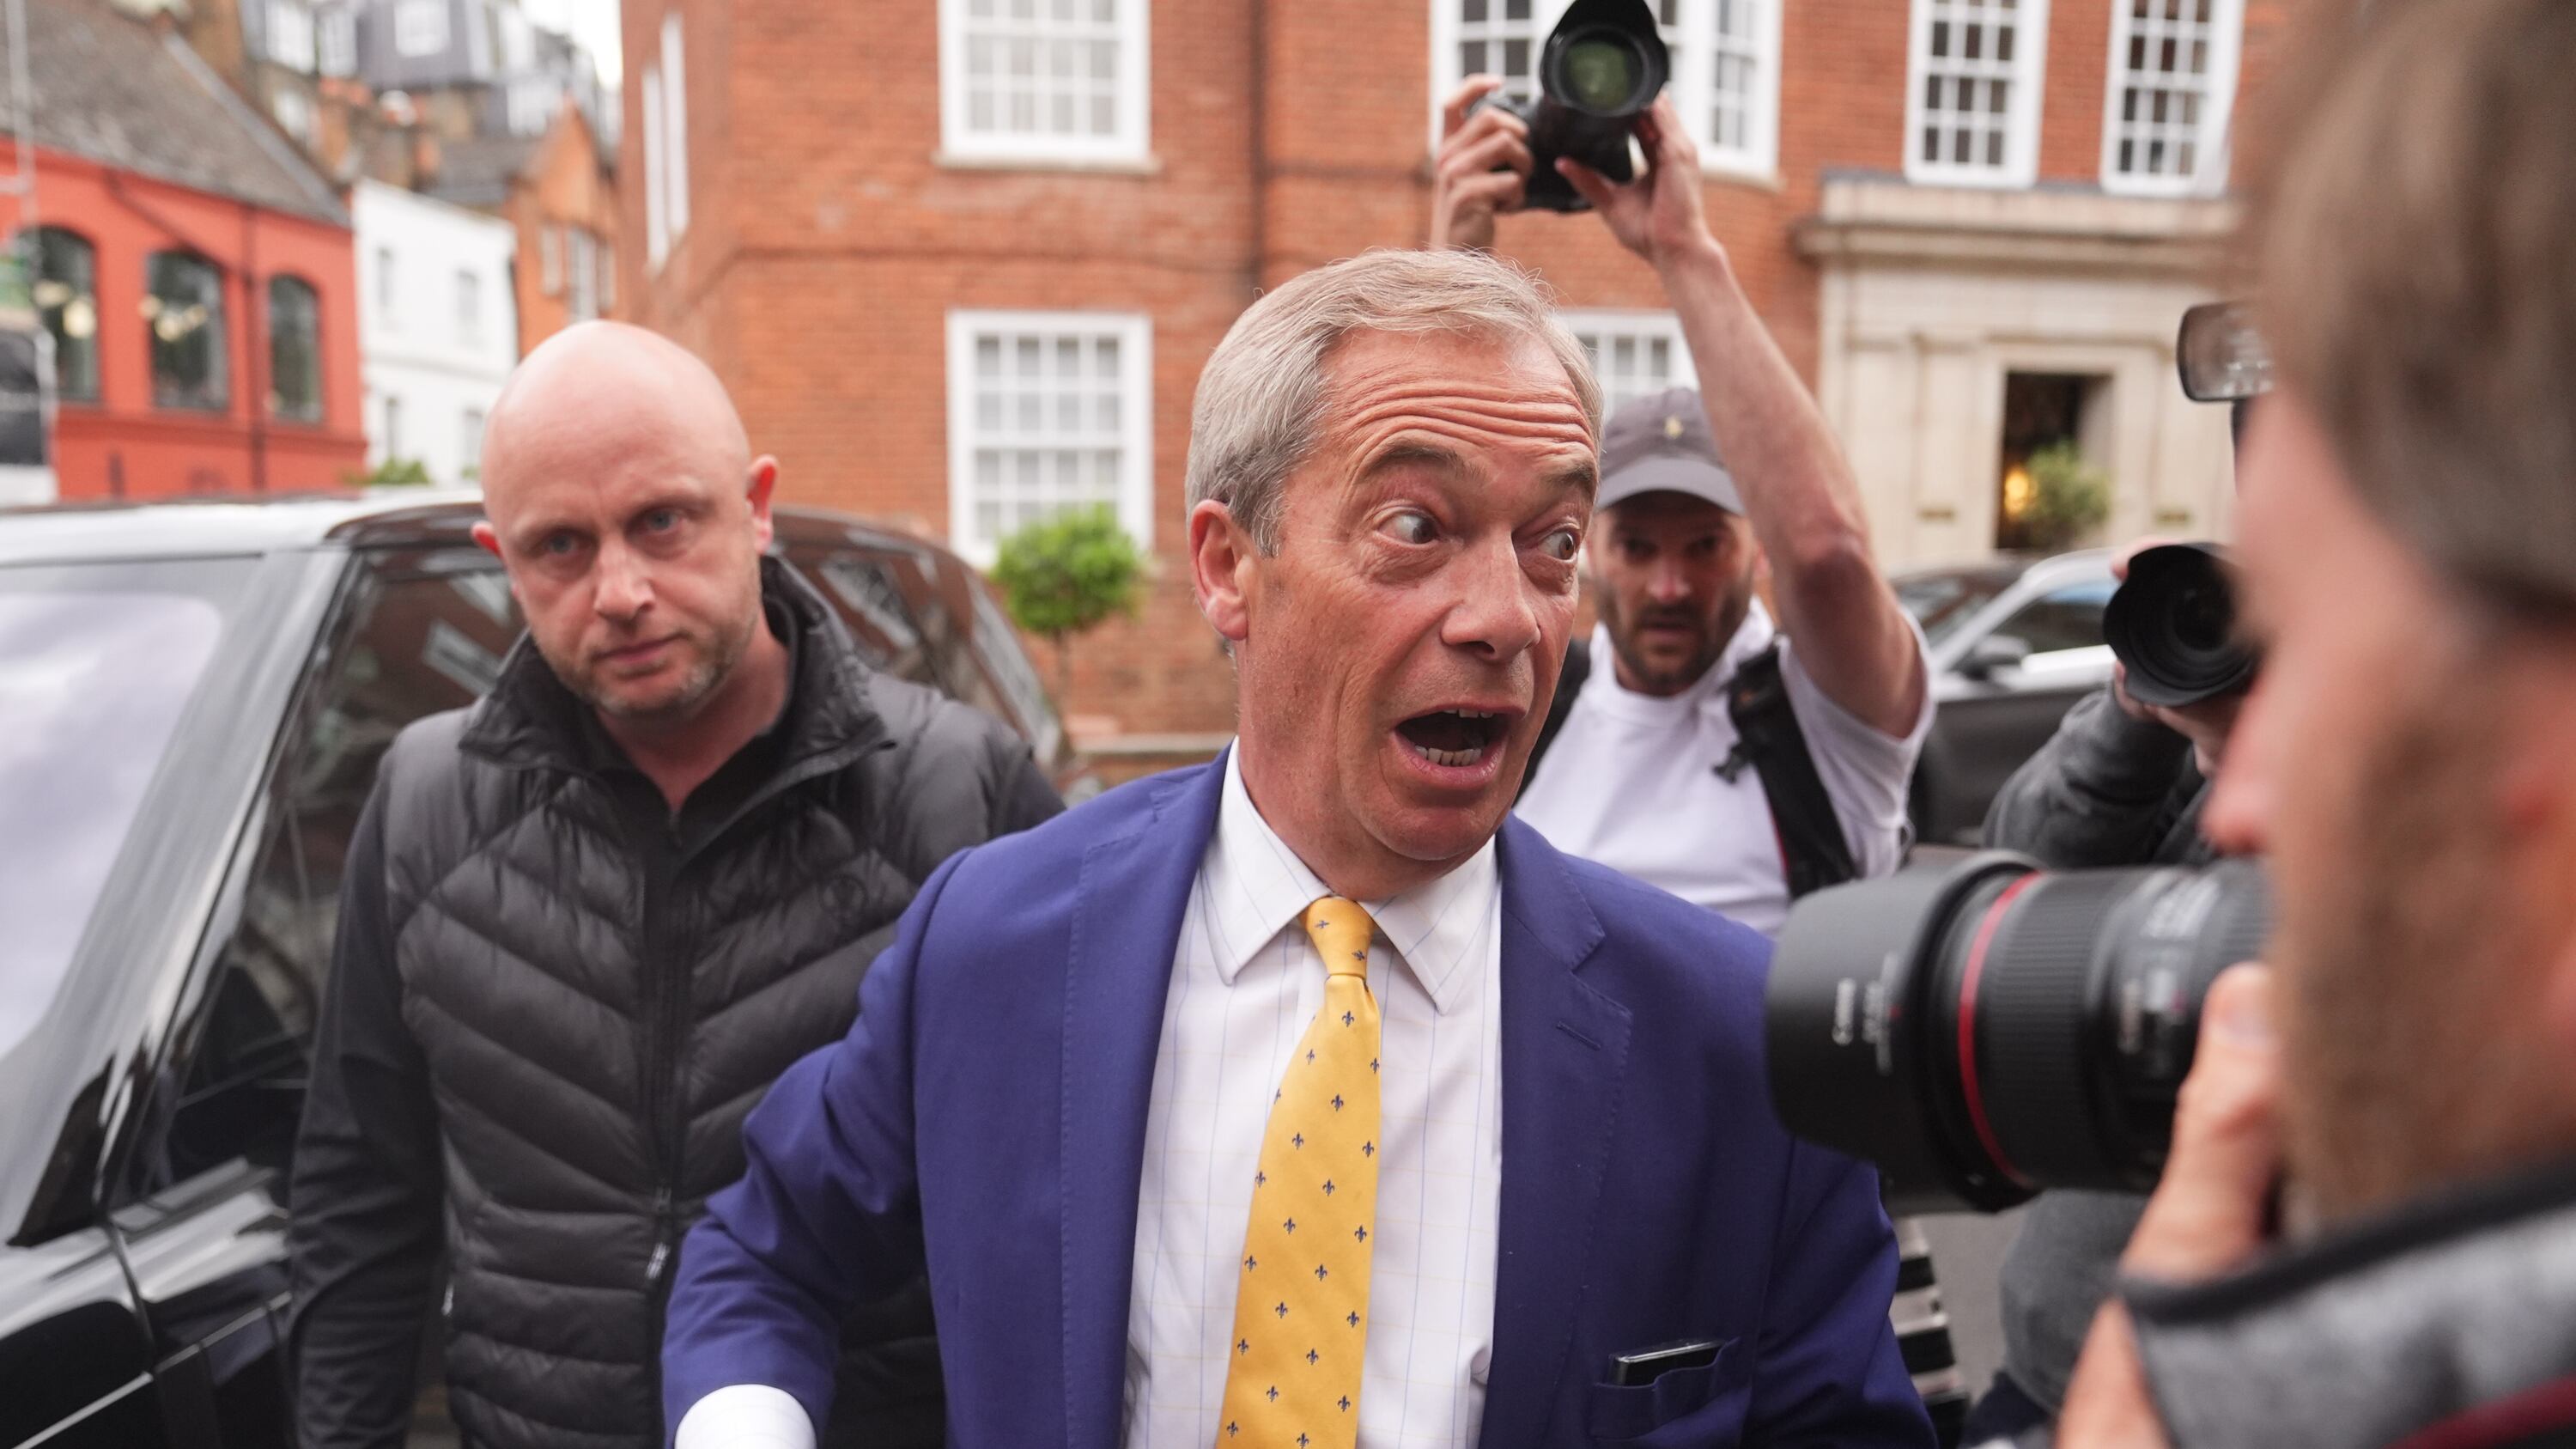 Reform UK leader Nigel Farage arrives at a fundraiser for Donald Trump, hosted by former Neighbours star Holly Valance